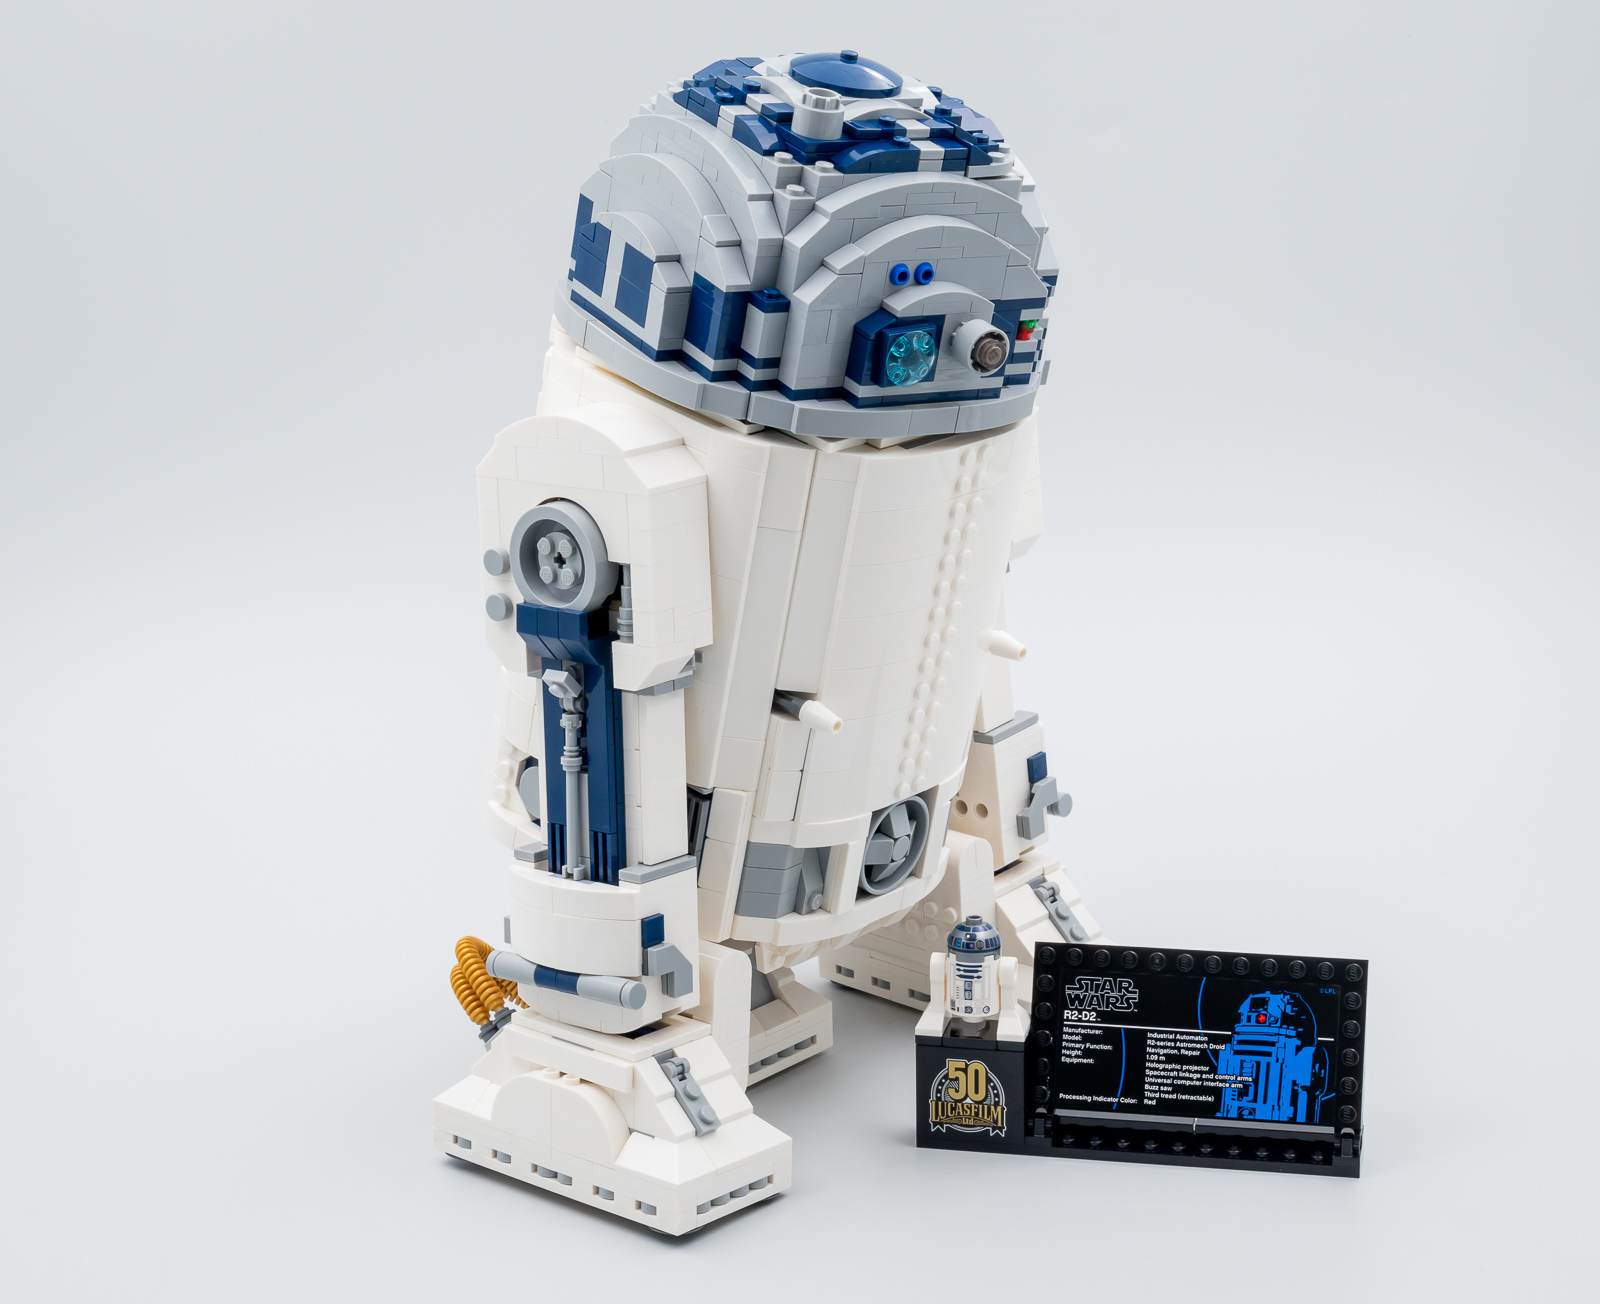 Lego Star Wars R2-D2 review